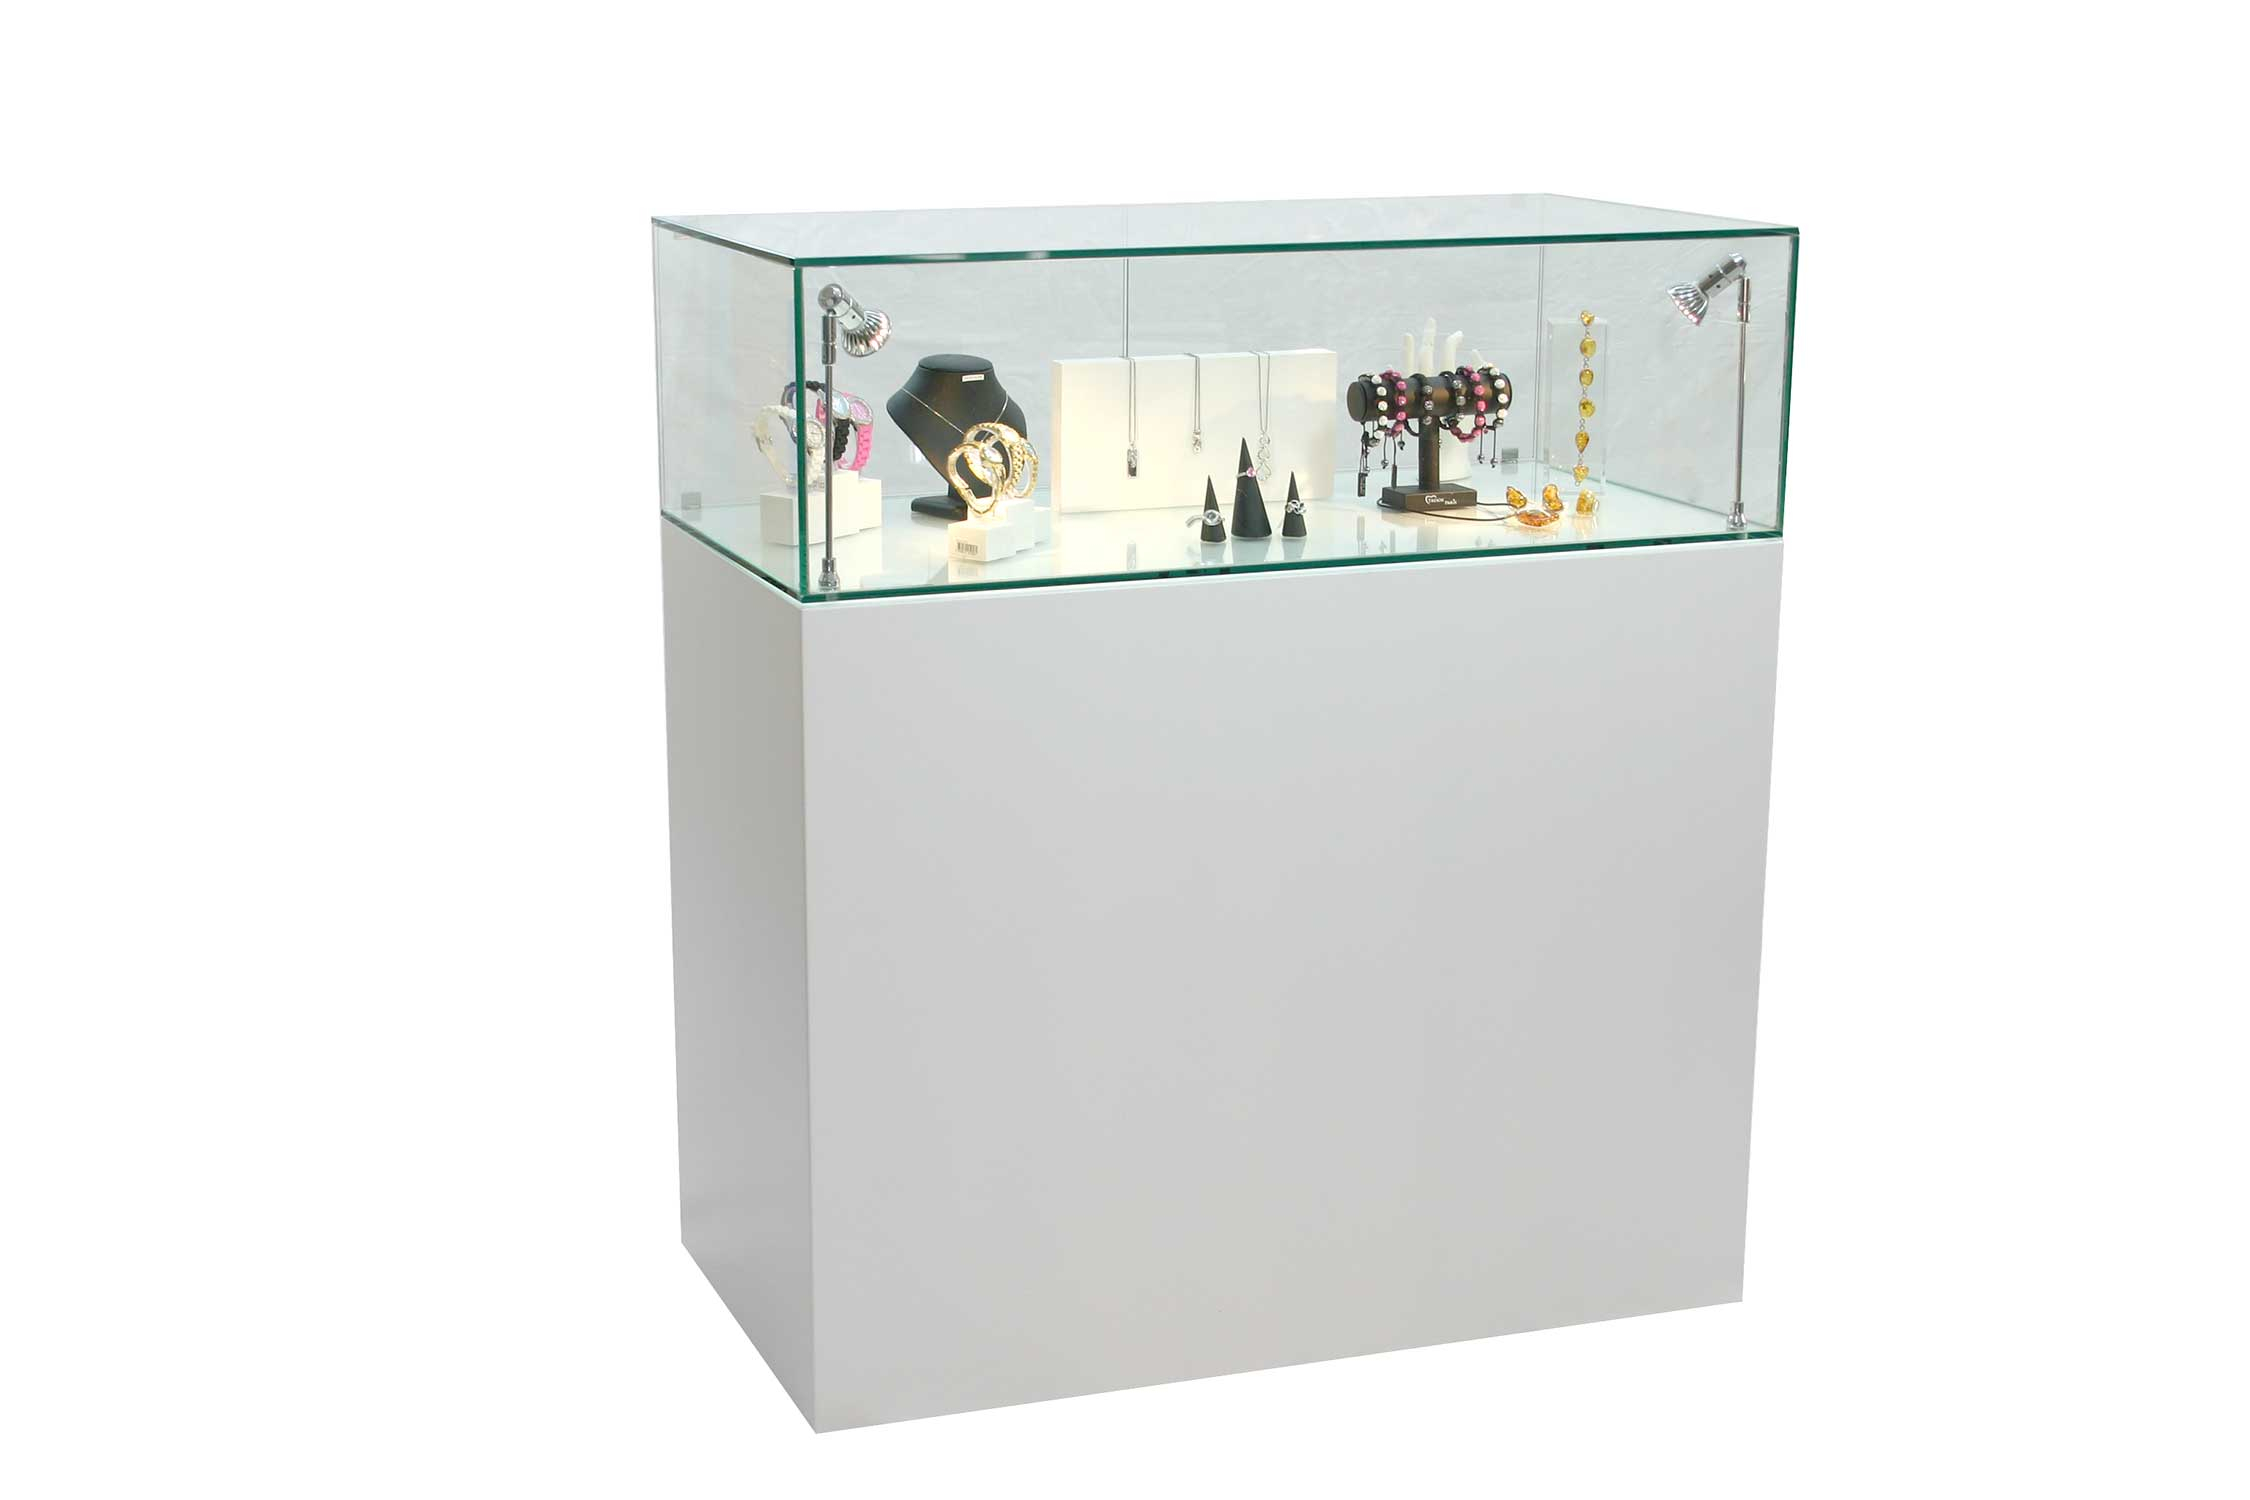 Jewellery Display Cases Exhibitionplinthscouk in measurements 2250 X 1500